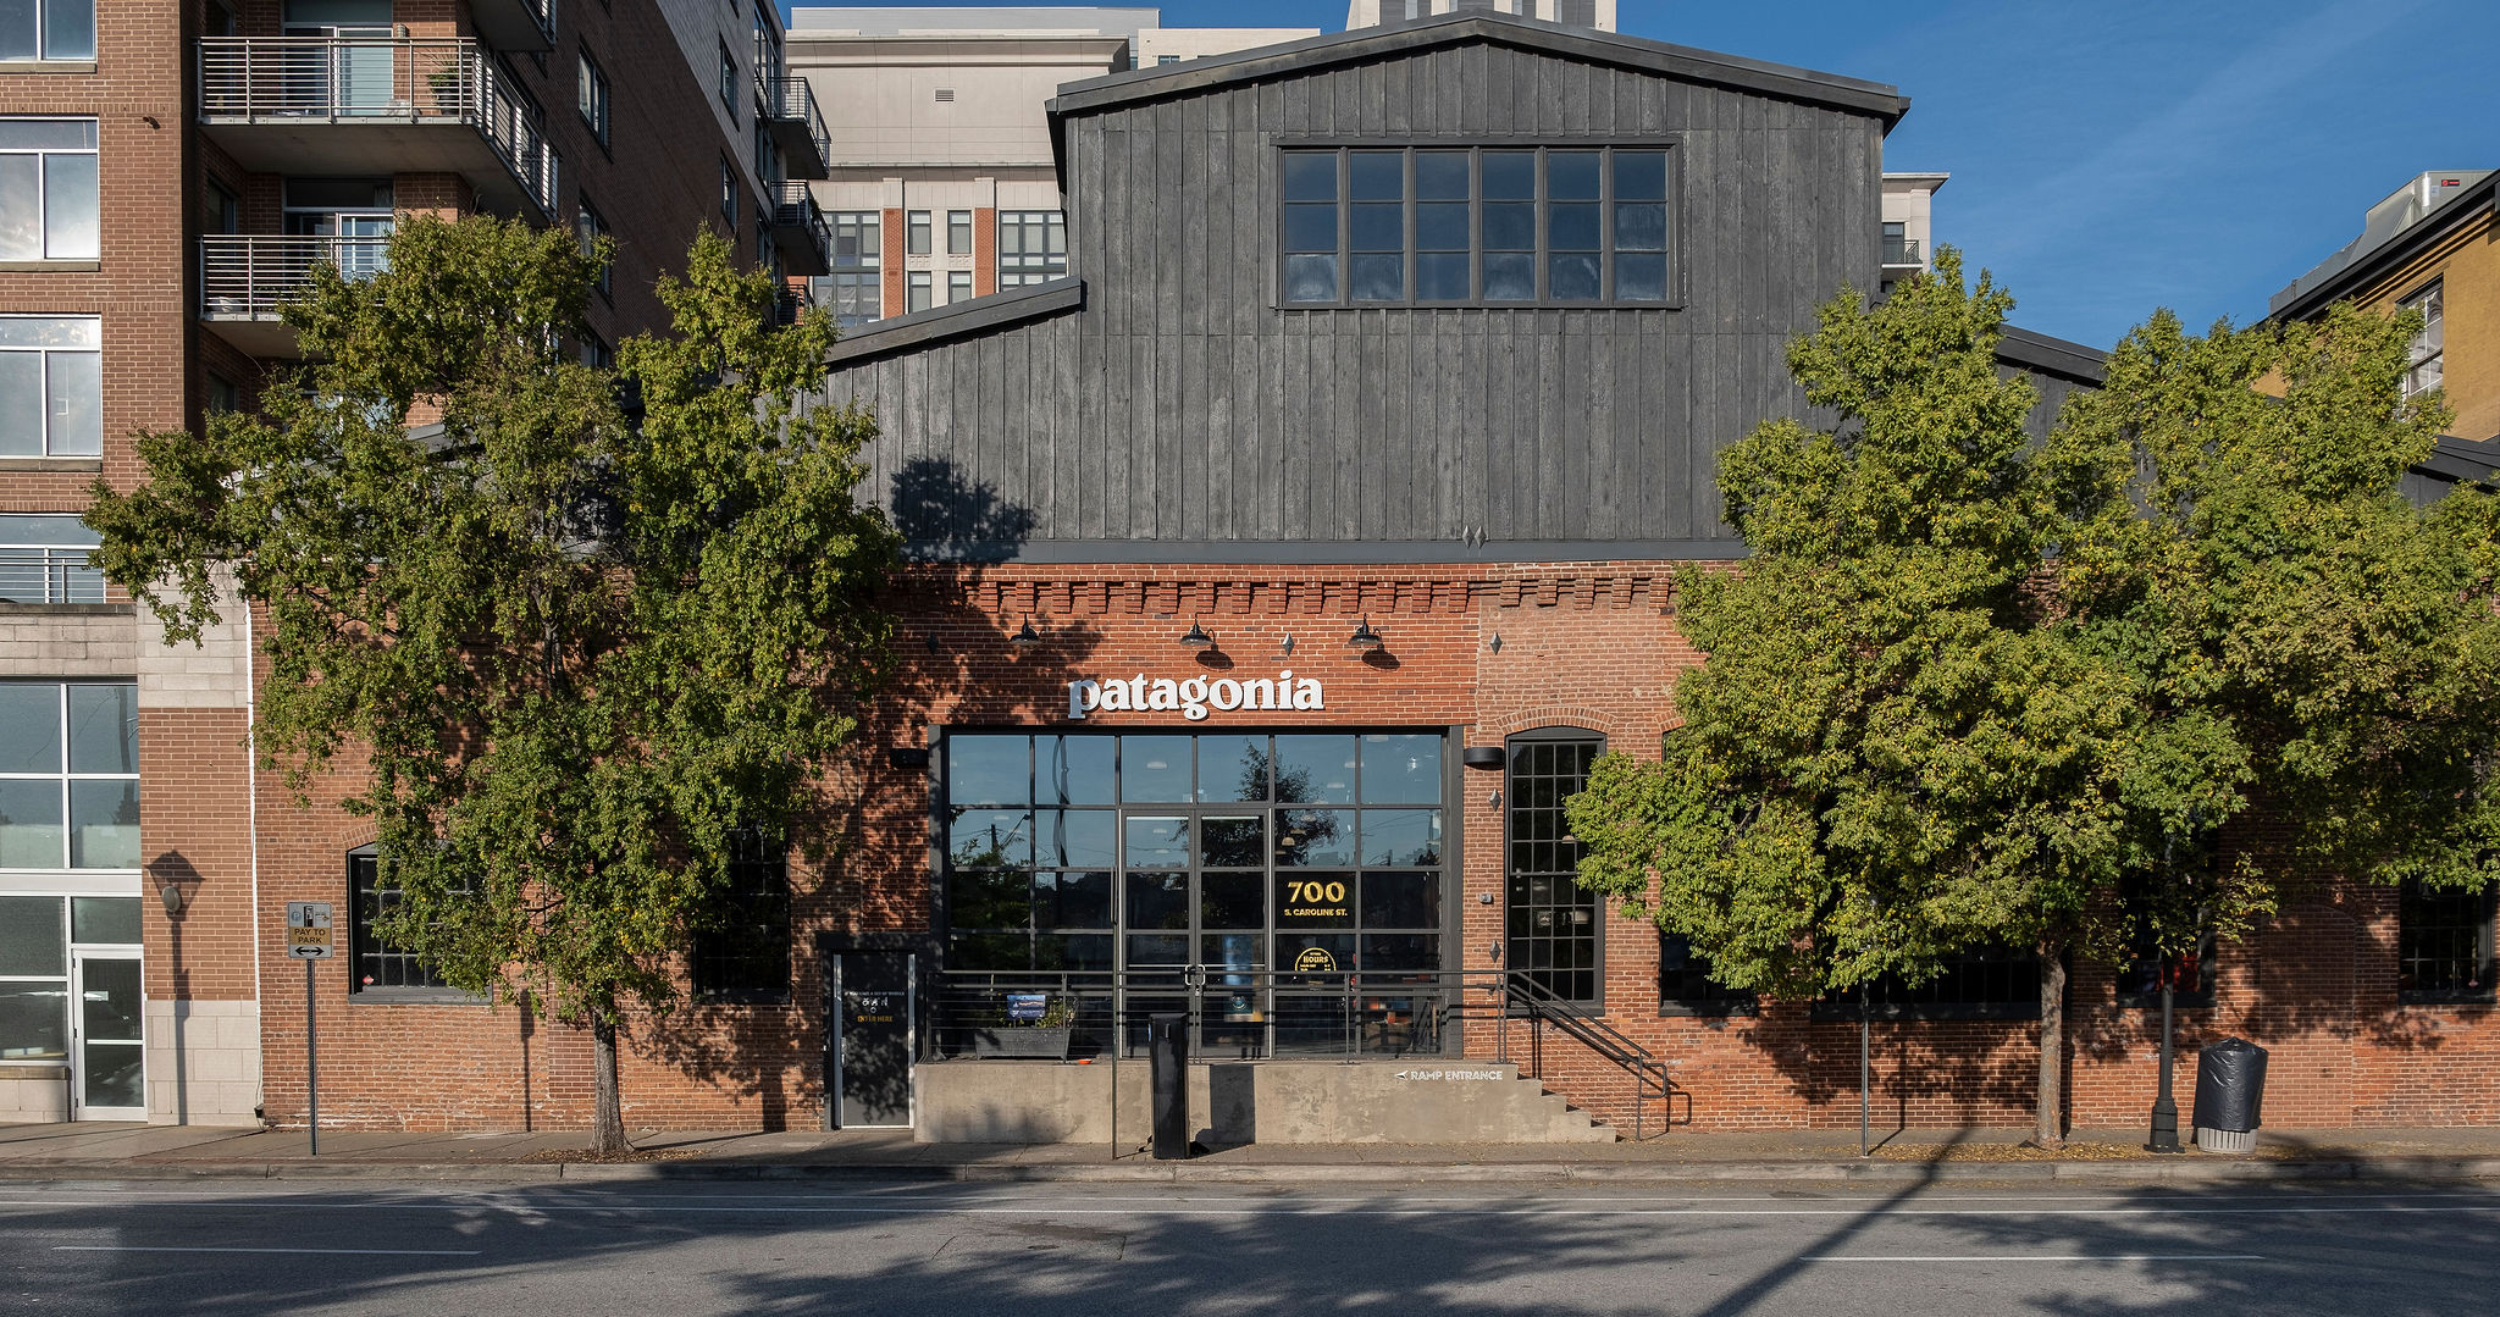 Planet Over Profit at Patagonia